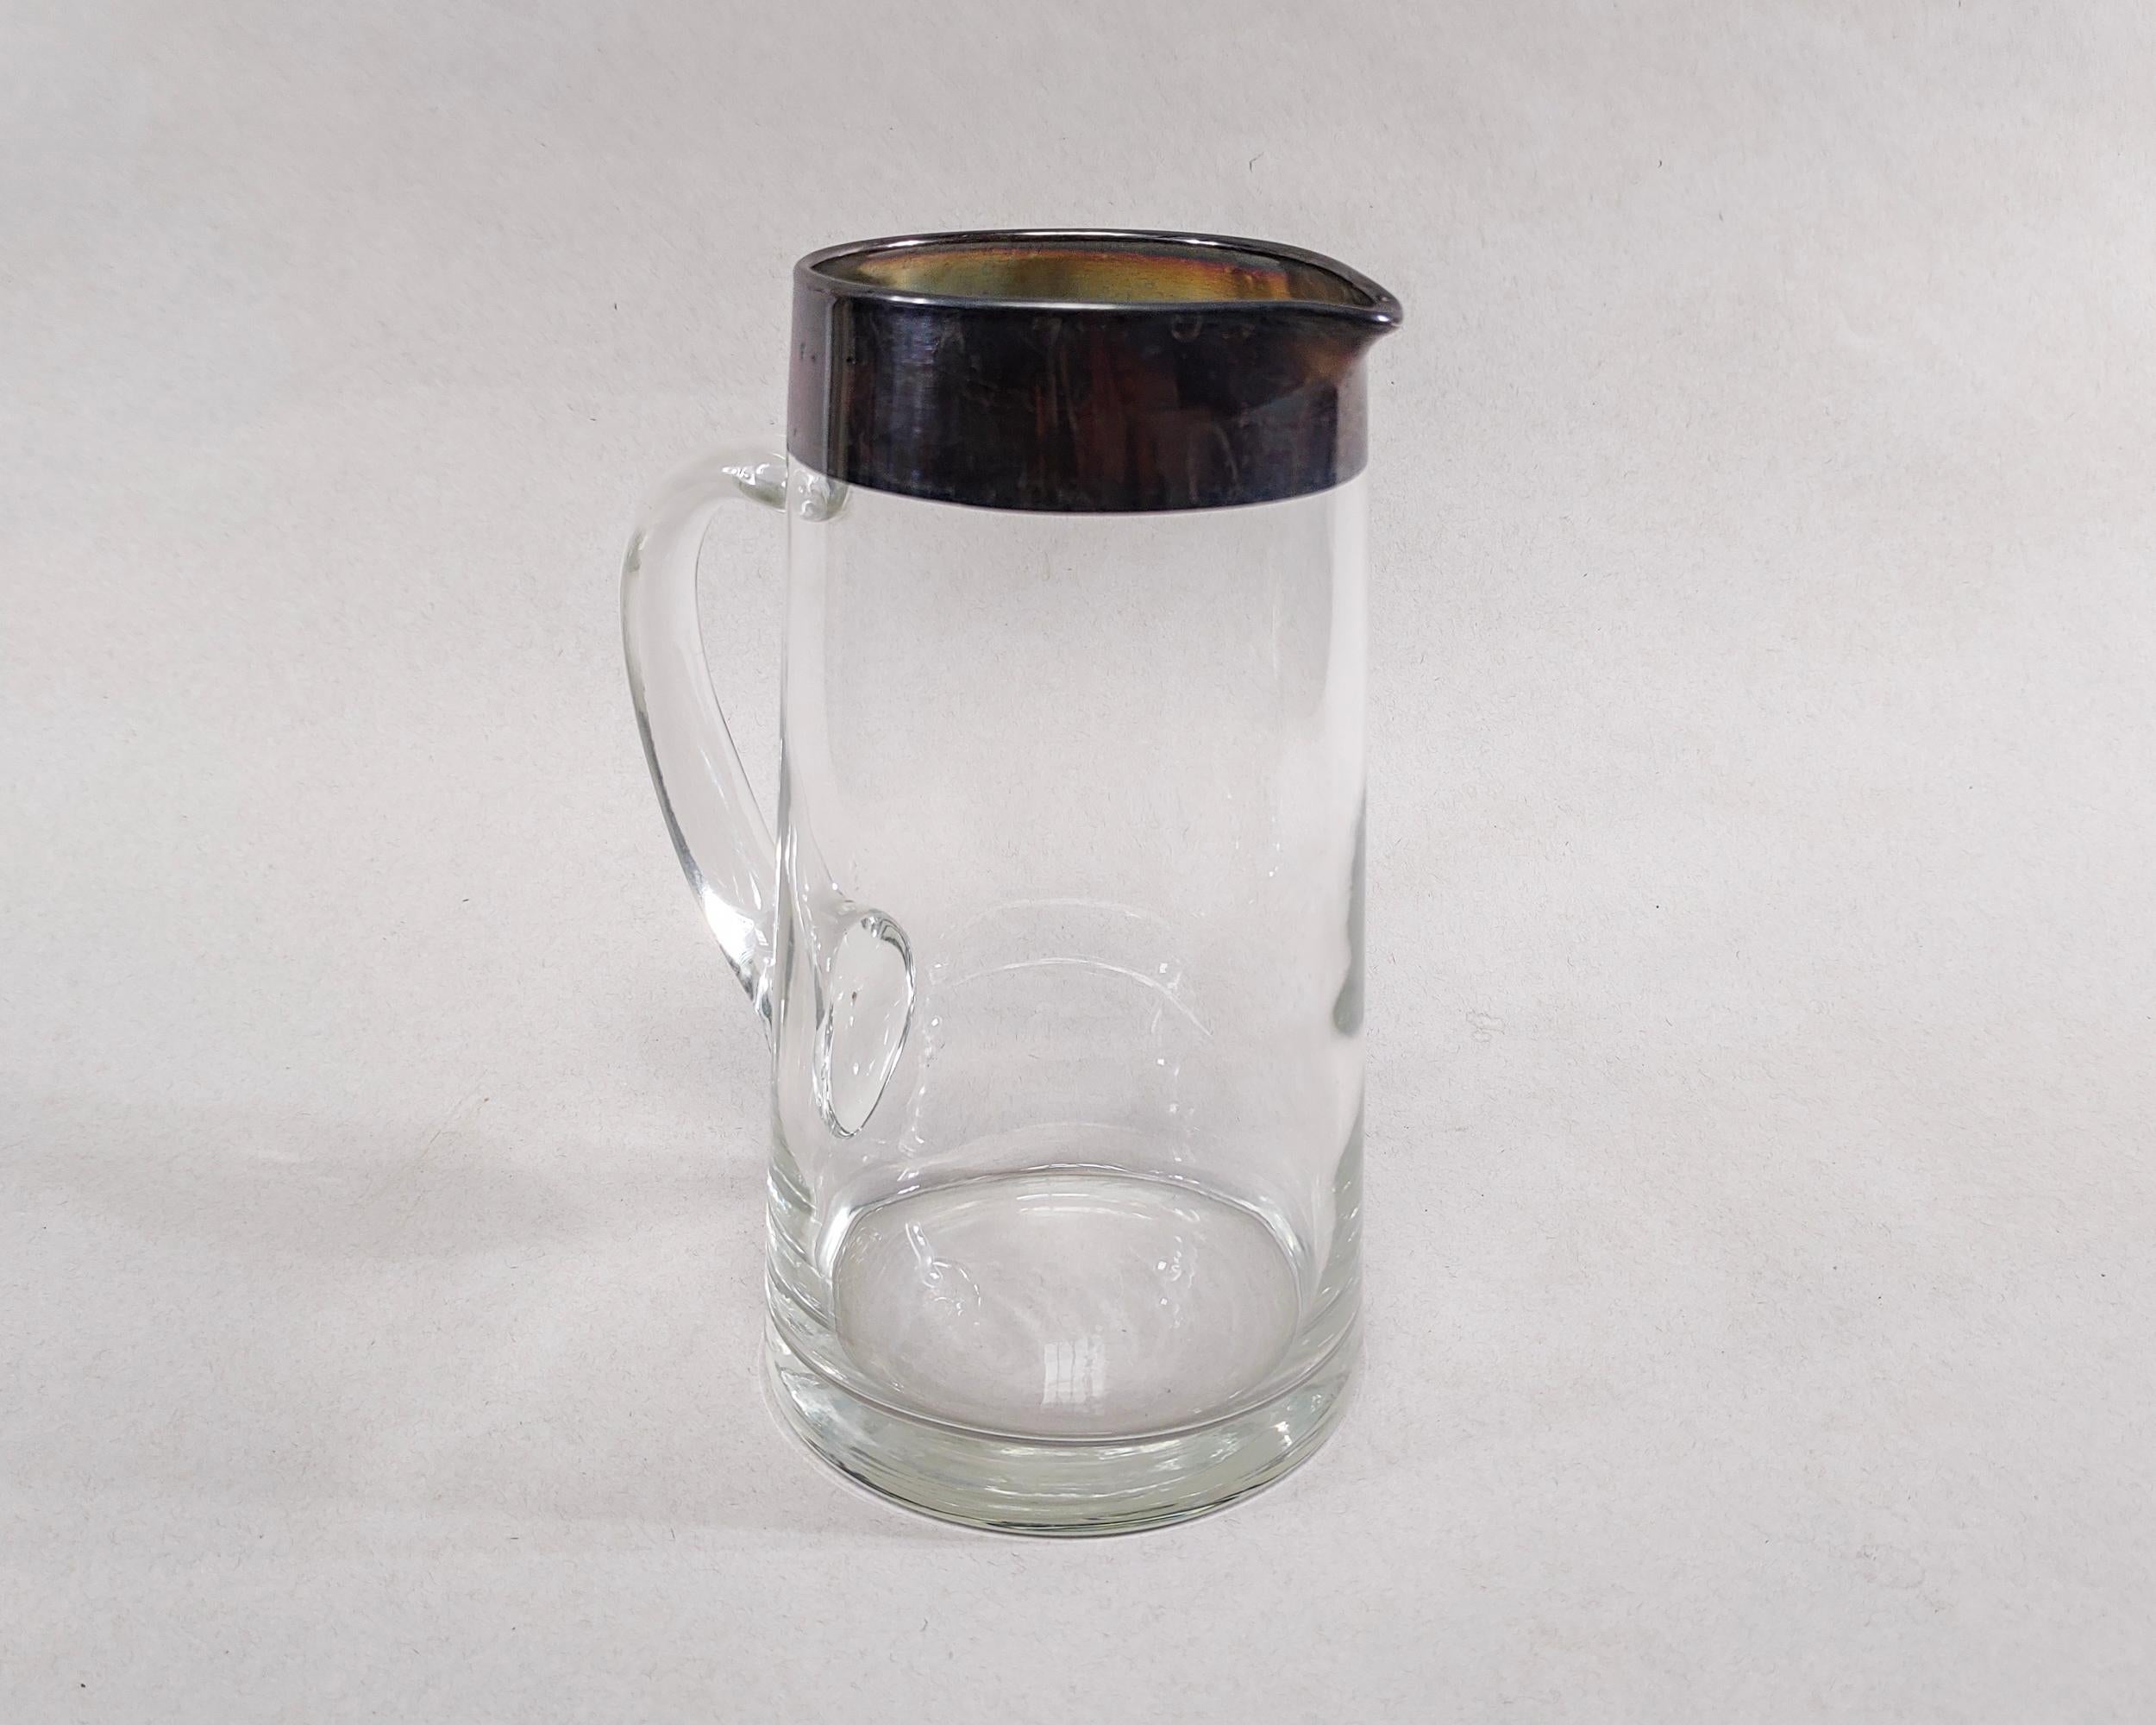 Vintage Dorothy Thorpe 52 oz. hand blown glass pitcher circa 1960s. Subtle taper with iconic thick sterling silver band around the rim.  Overall great condition, natural darkened patina on silver, couple of chips to silver as shown in photo.

8-5/8